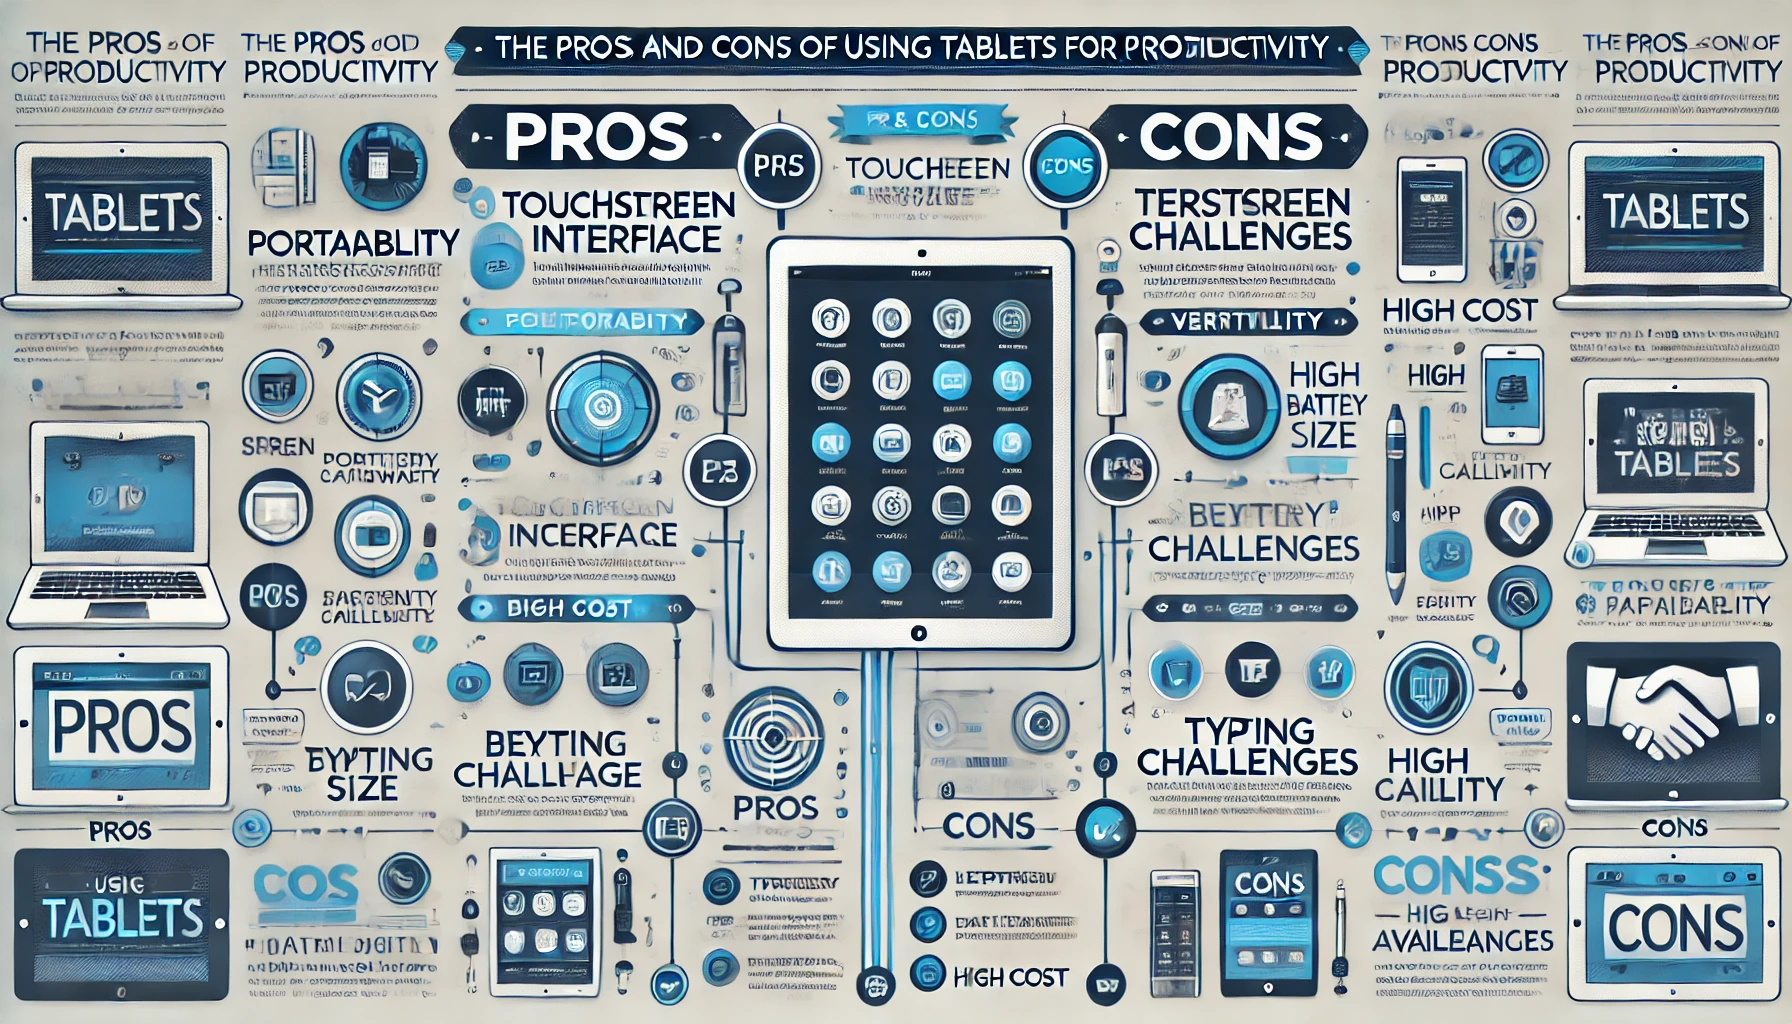 The Pros and Cons of Using Tablets for Productivity